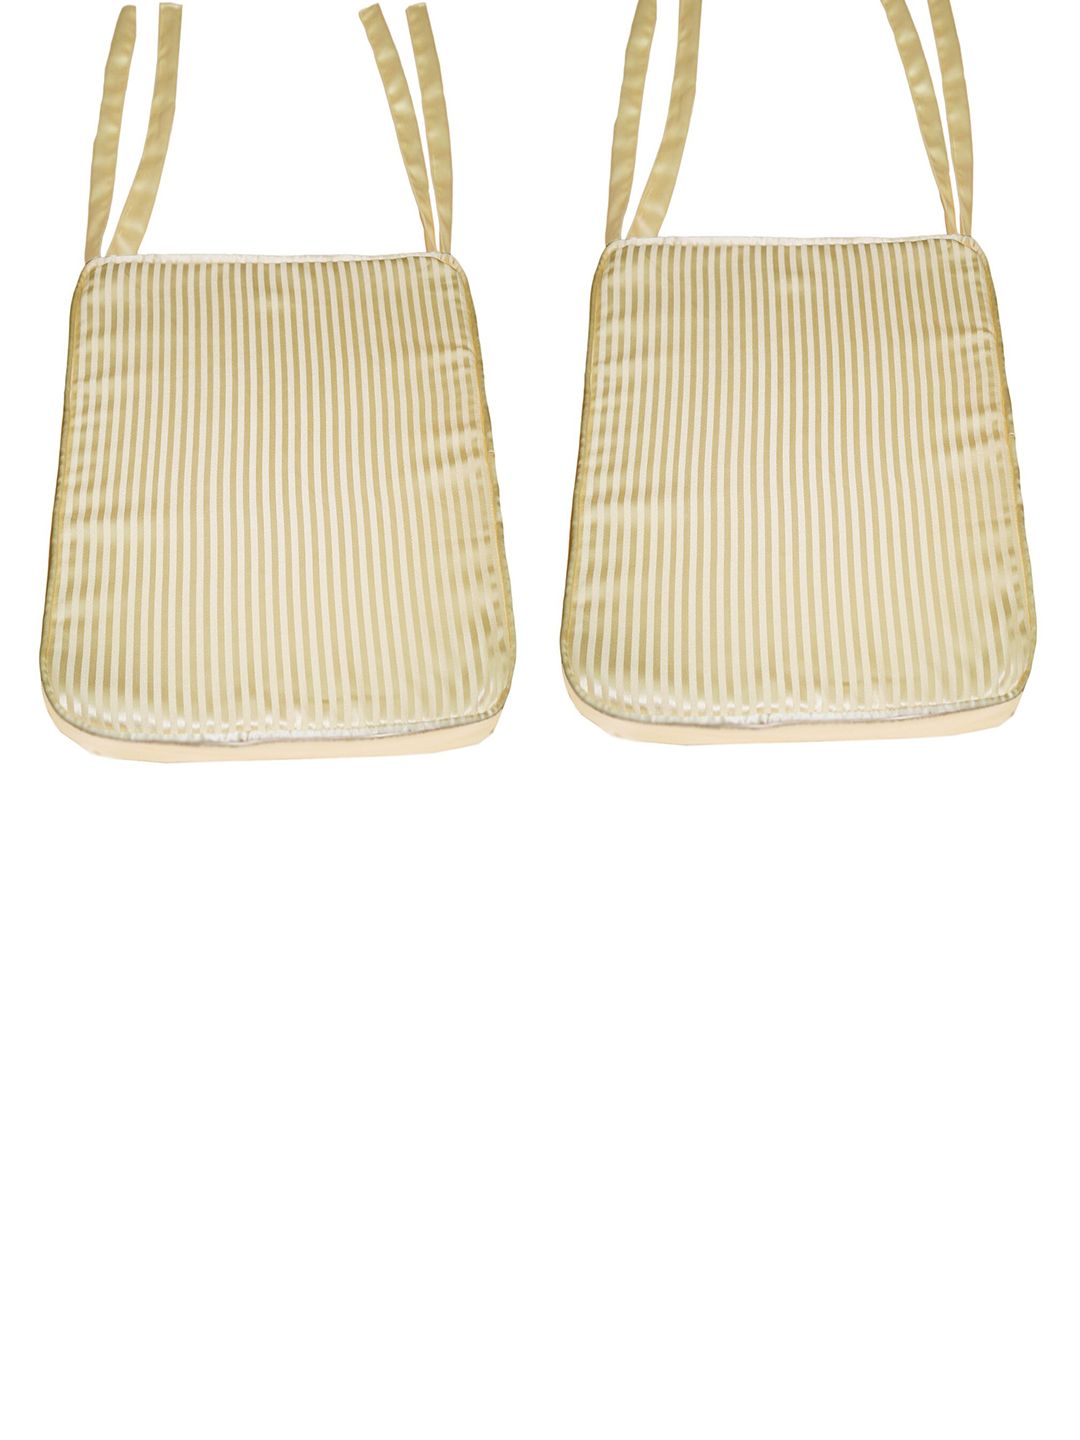 Lushomes Set of 2 Beige Striped Chair Pad Price in India